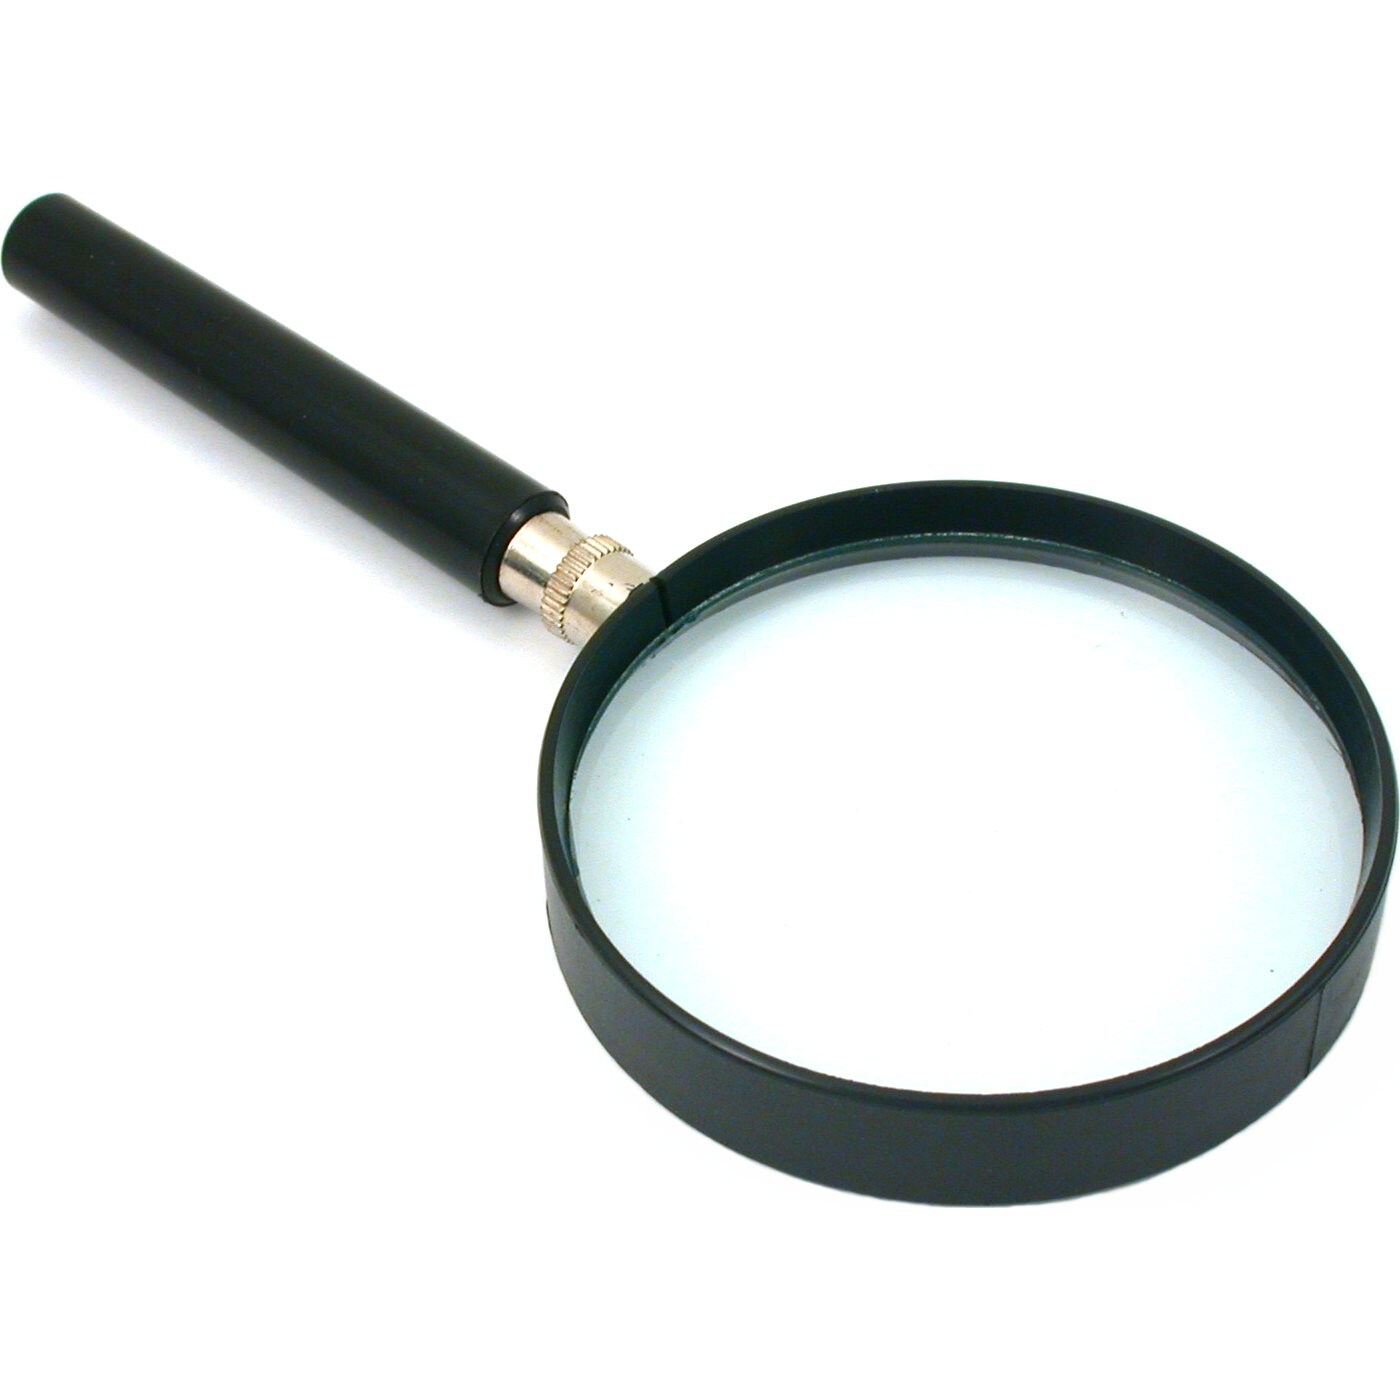 3X Magnifying Glass Stamps Coins Maps Magnification Reading Aid Tool